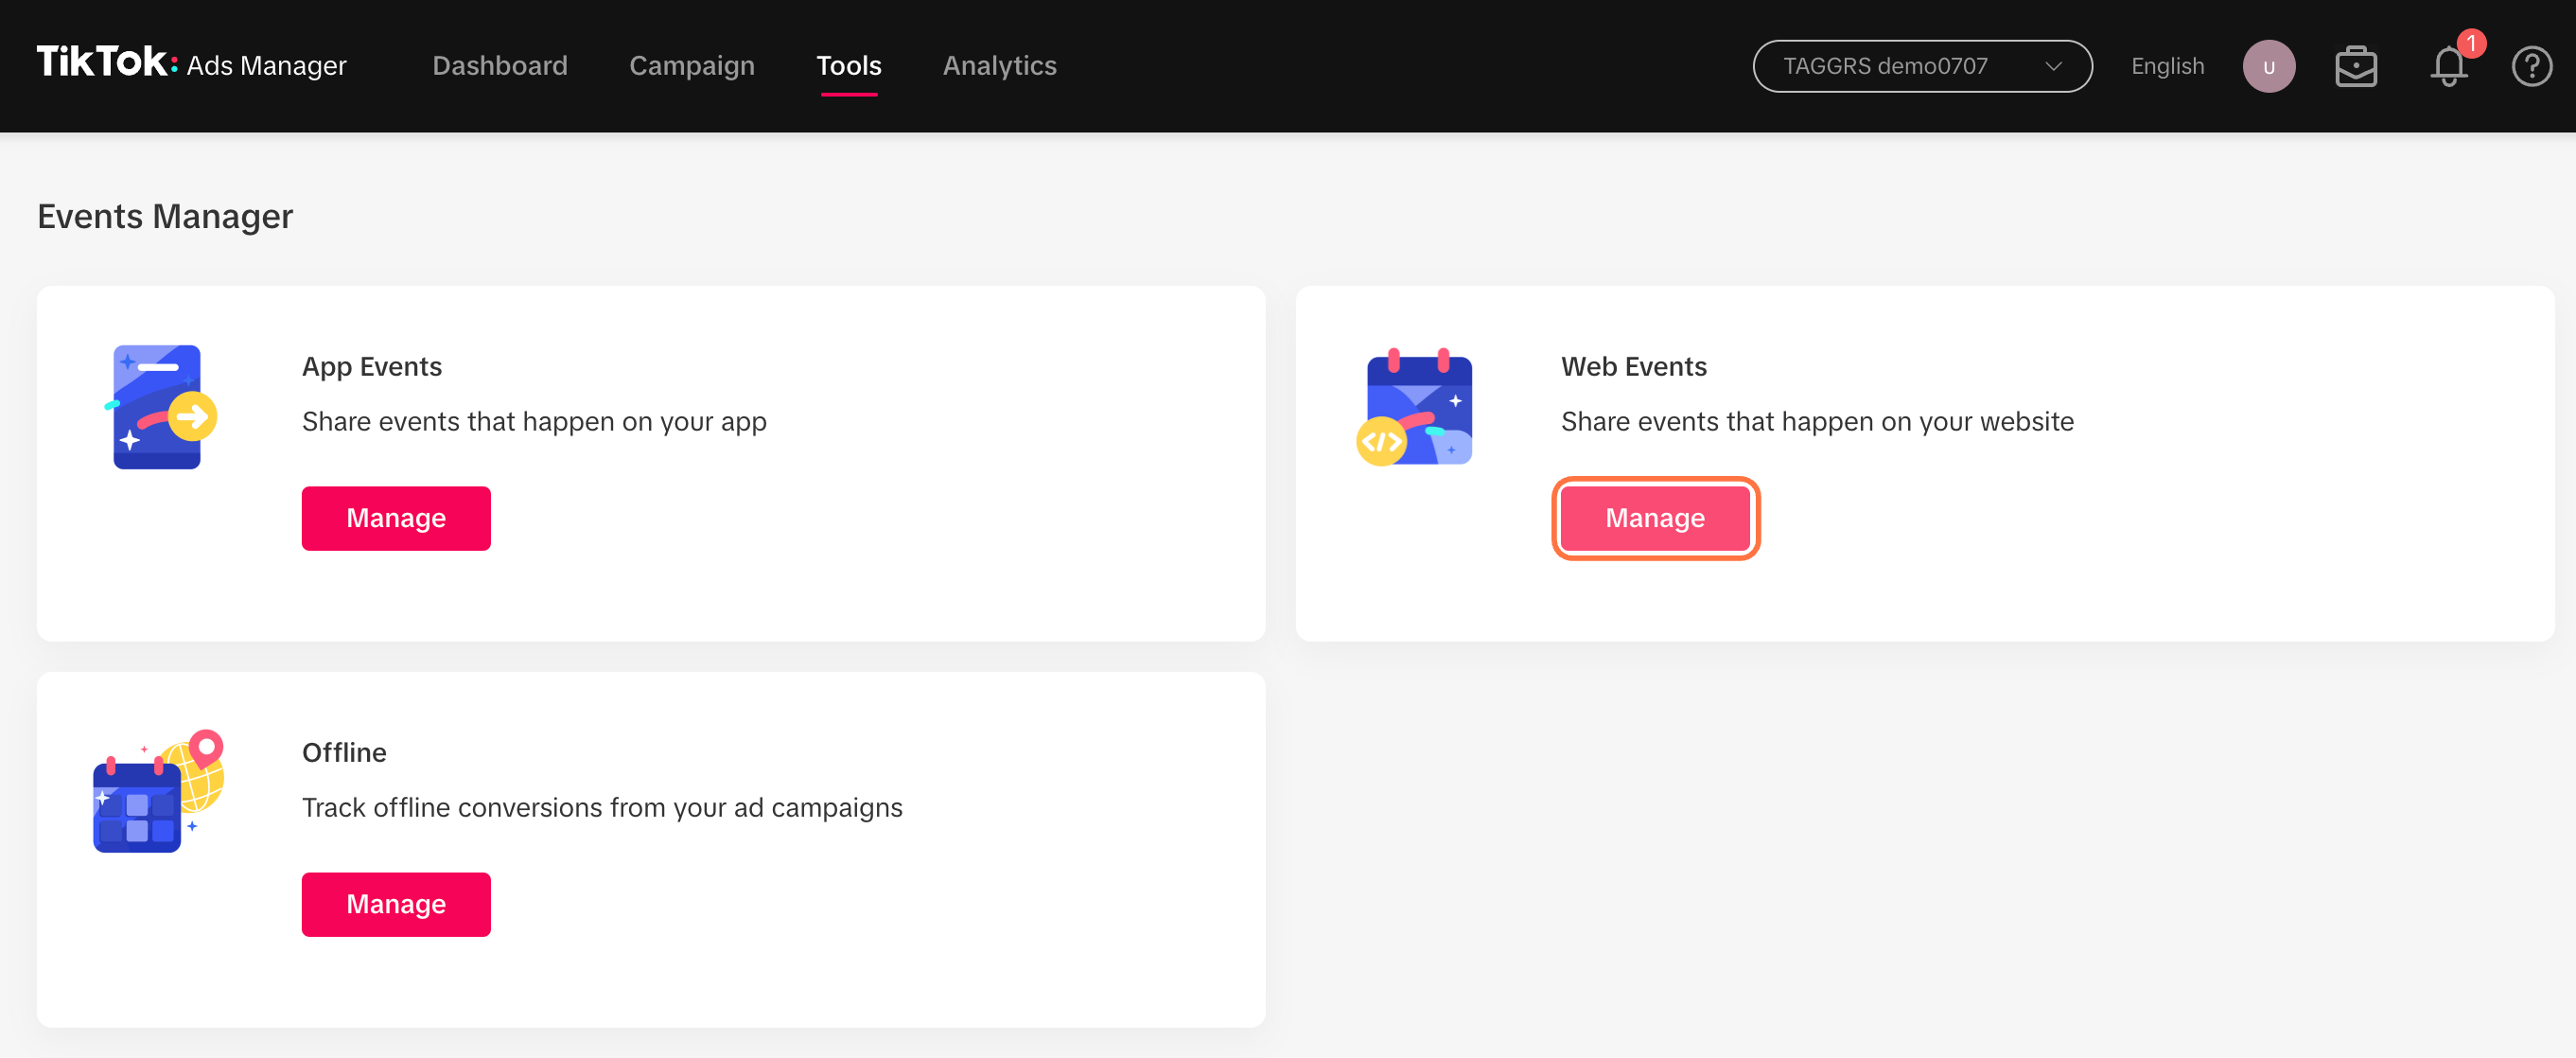 manage-web-events-in-tools-tiktok-ads-manager